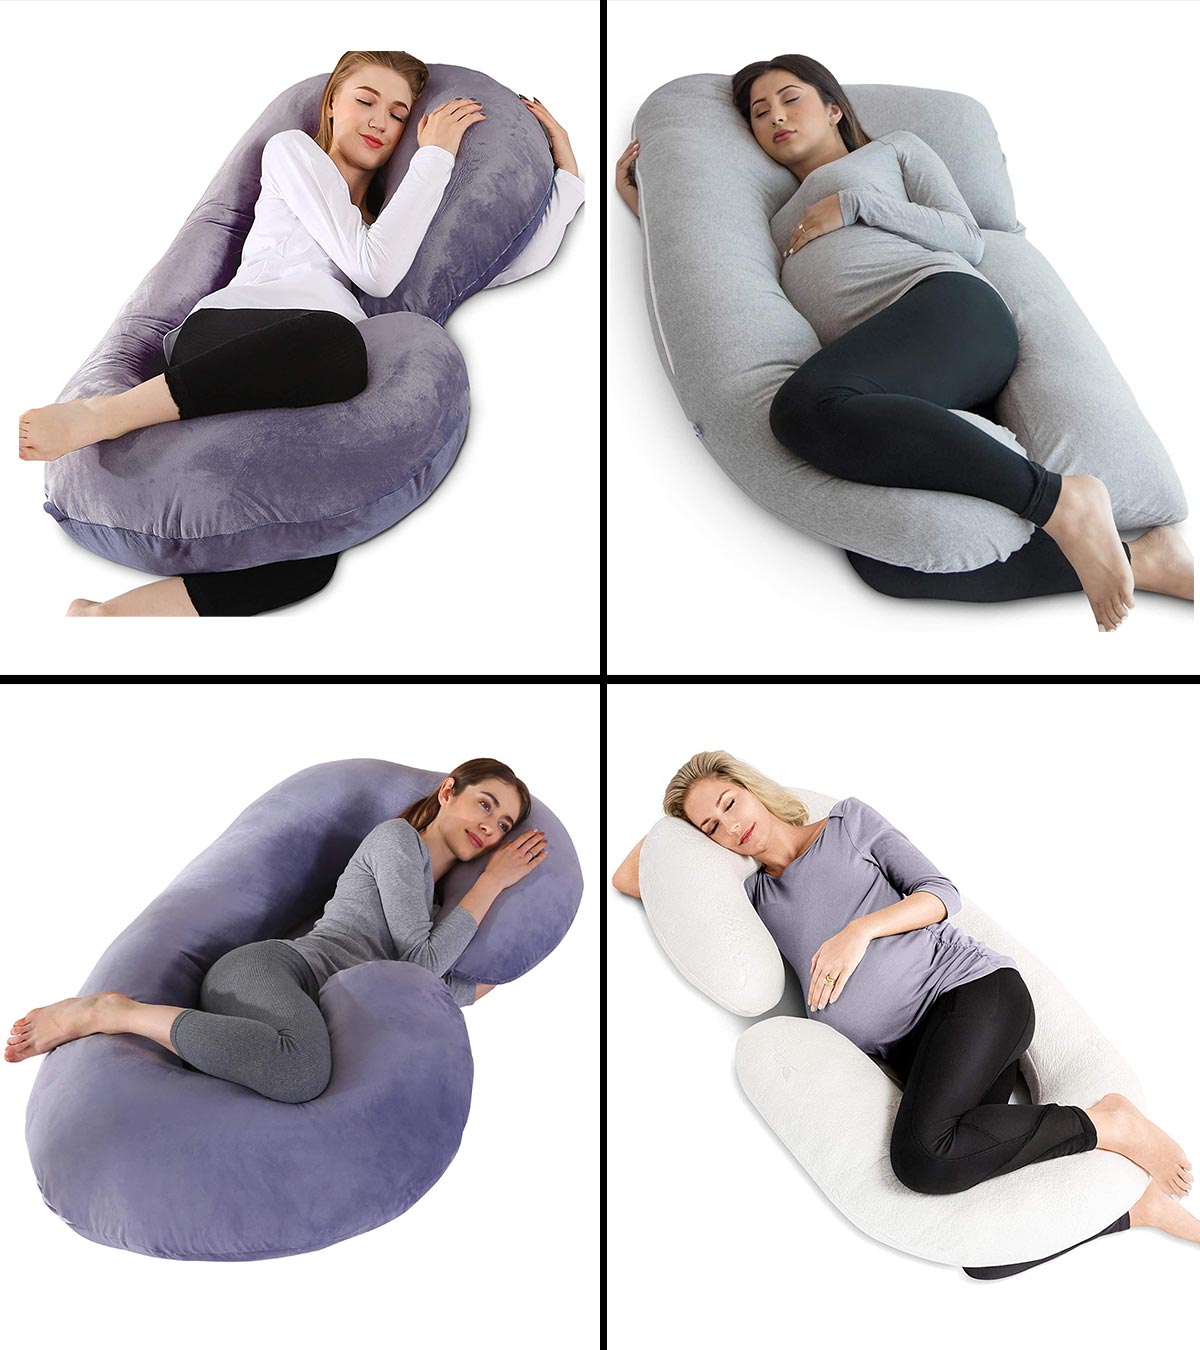 HBselect Full Body Maternity Pillow Detachable U Shaped Pregnancy Pillow with Zip Cotton Case Cover/Nursing and Breastfeeding Support Pillow 170*65cm 